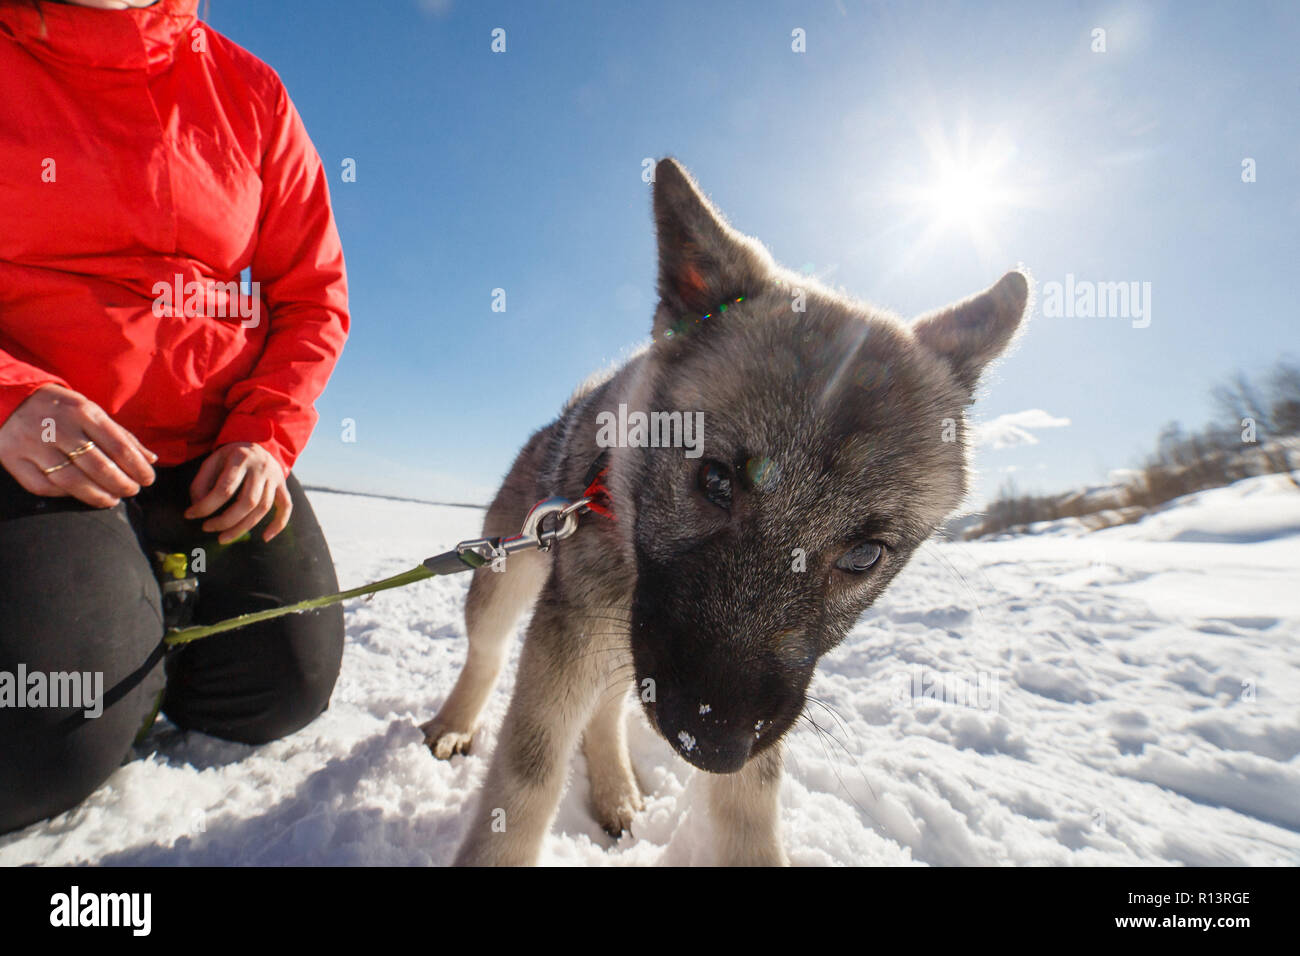 Little puppy Norwegian grey elkhund (norsk elghund grå) playing with owner in winter park Stock Photo